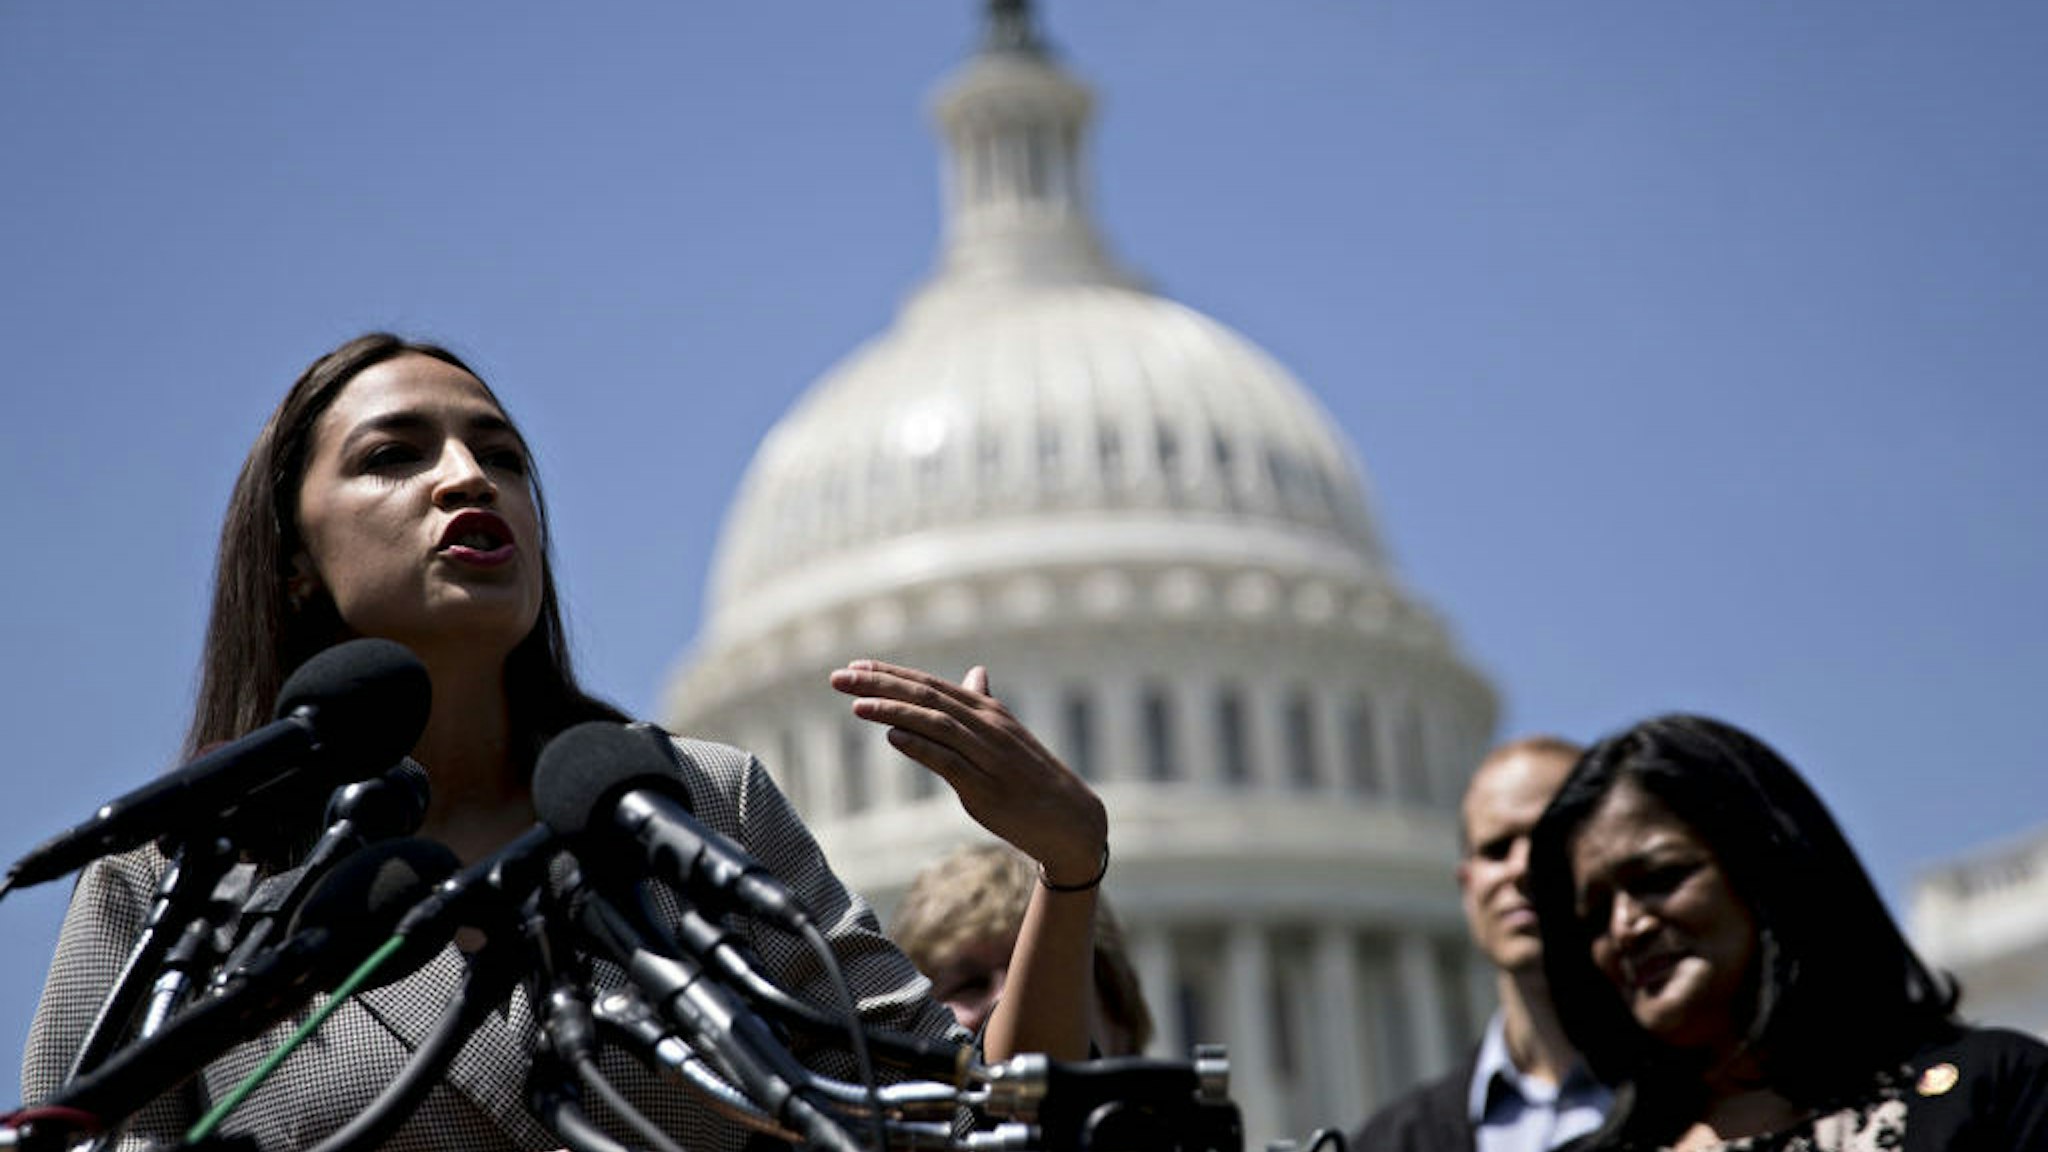 Representative Alexandria Ocasio-Cortez, a Democrat from New York, speaks during a news conference announcing college affordability legislation on Capitol Hill in Washington, D.C., U.S., on Monday, June 24, 2019. Democratic presidential hopeful Bernie Sanders is proposing to cancel the nation's outstanding $1.6 trillion of student debt and offsetting the cost with a tax on Wall Street transactions. Photographer: Andrew Harrer/Bloomberg